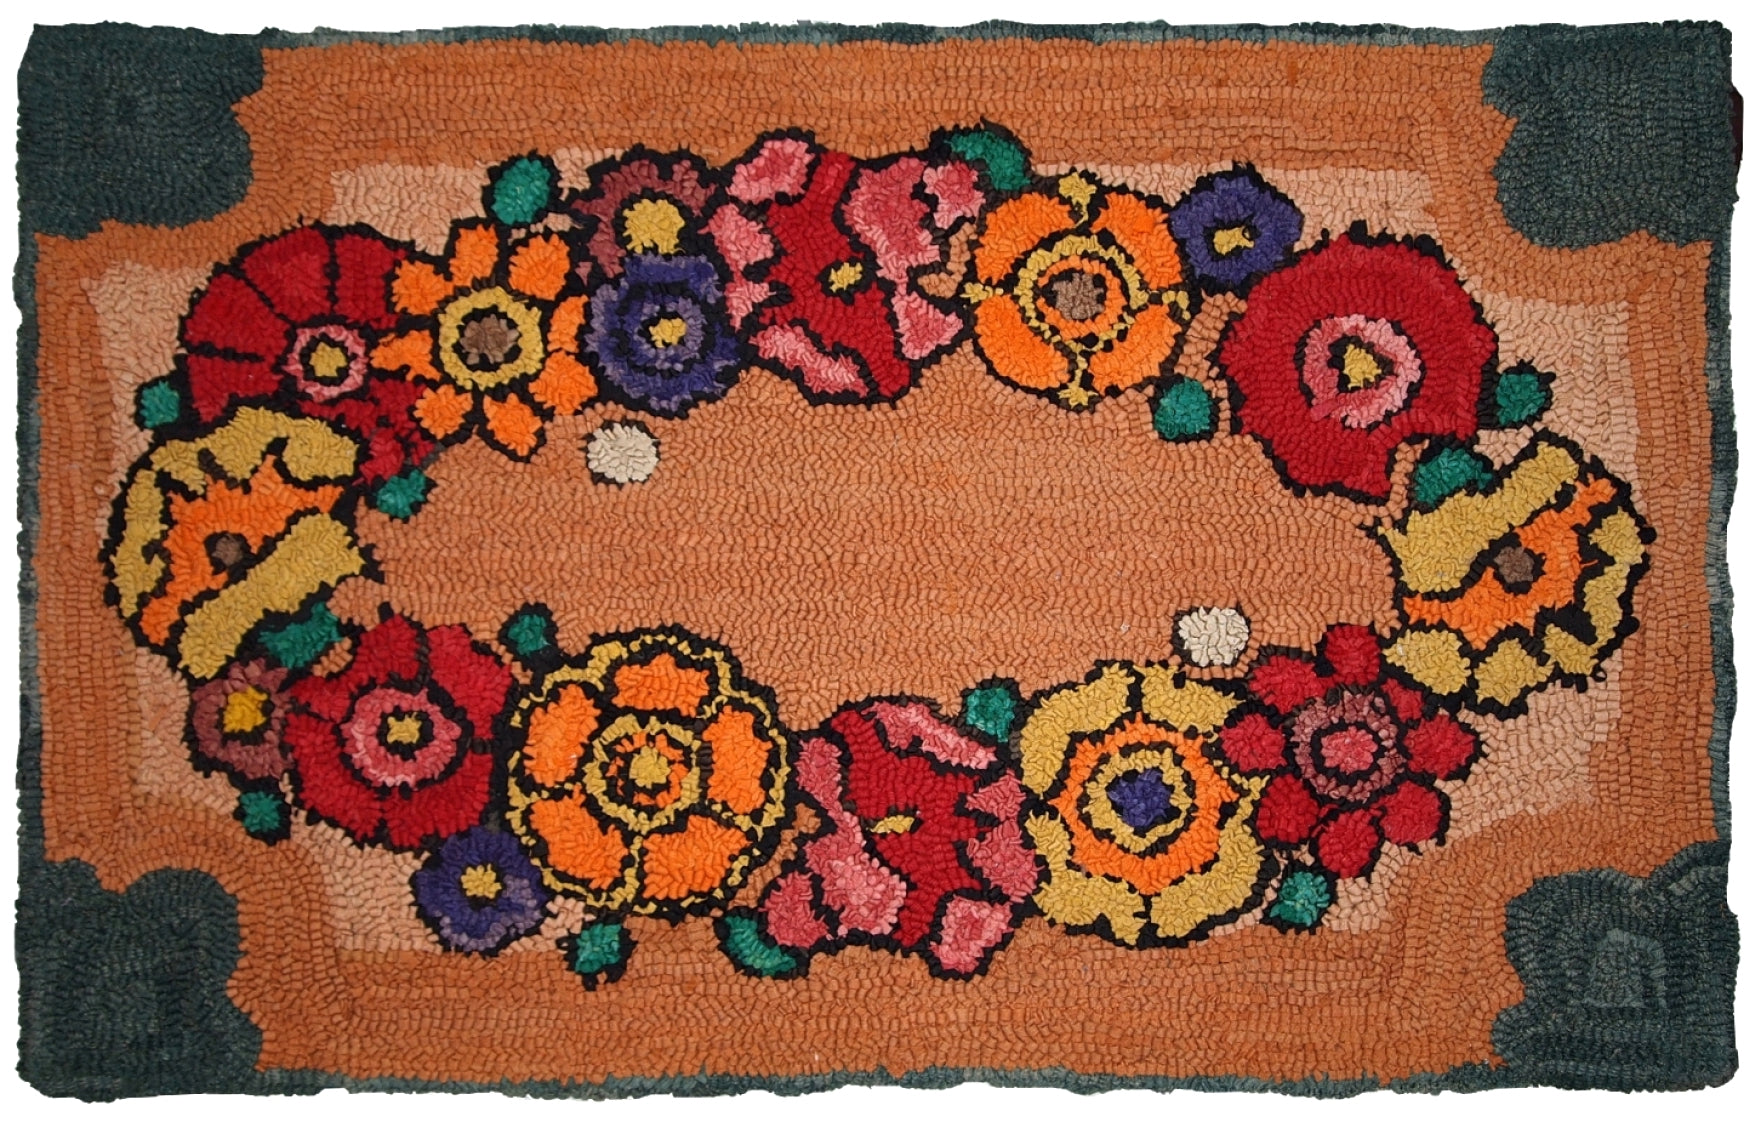 Close-up of the colorful flower center of the vintage hooked rug